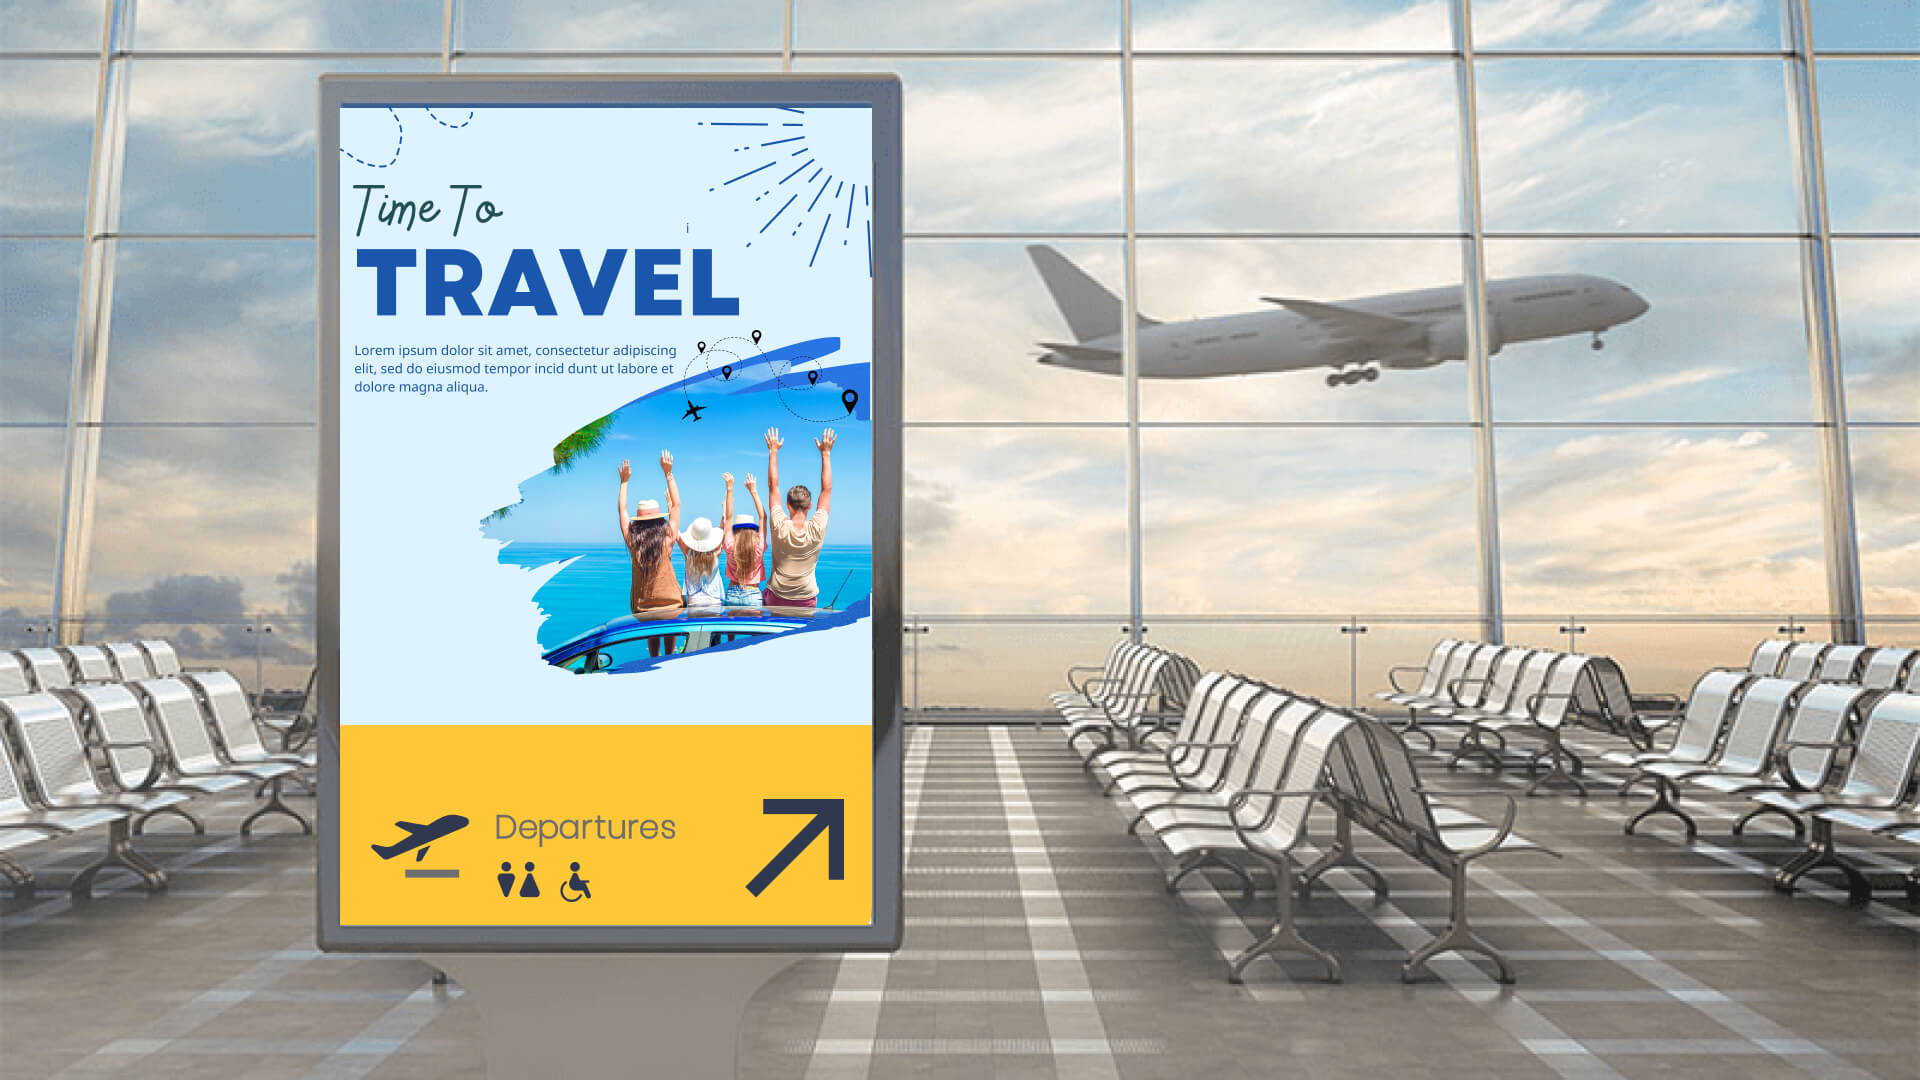  On-premise digital signage solutions help in reducing downtime at airports.